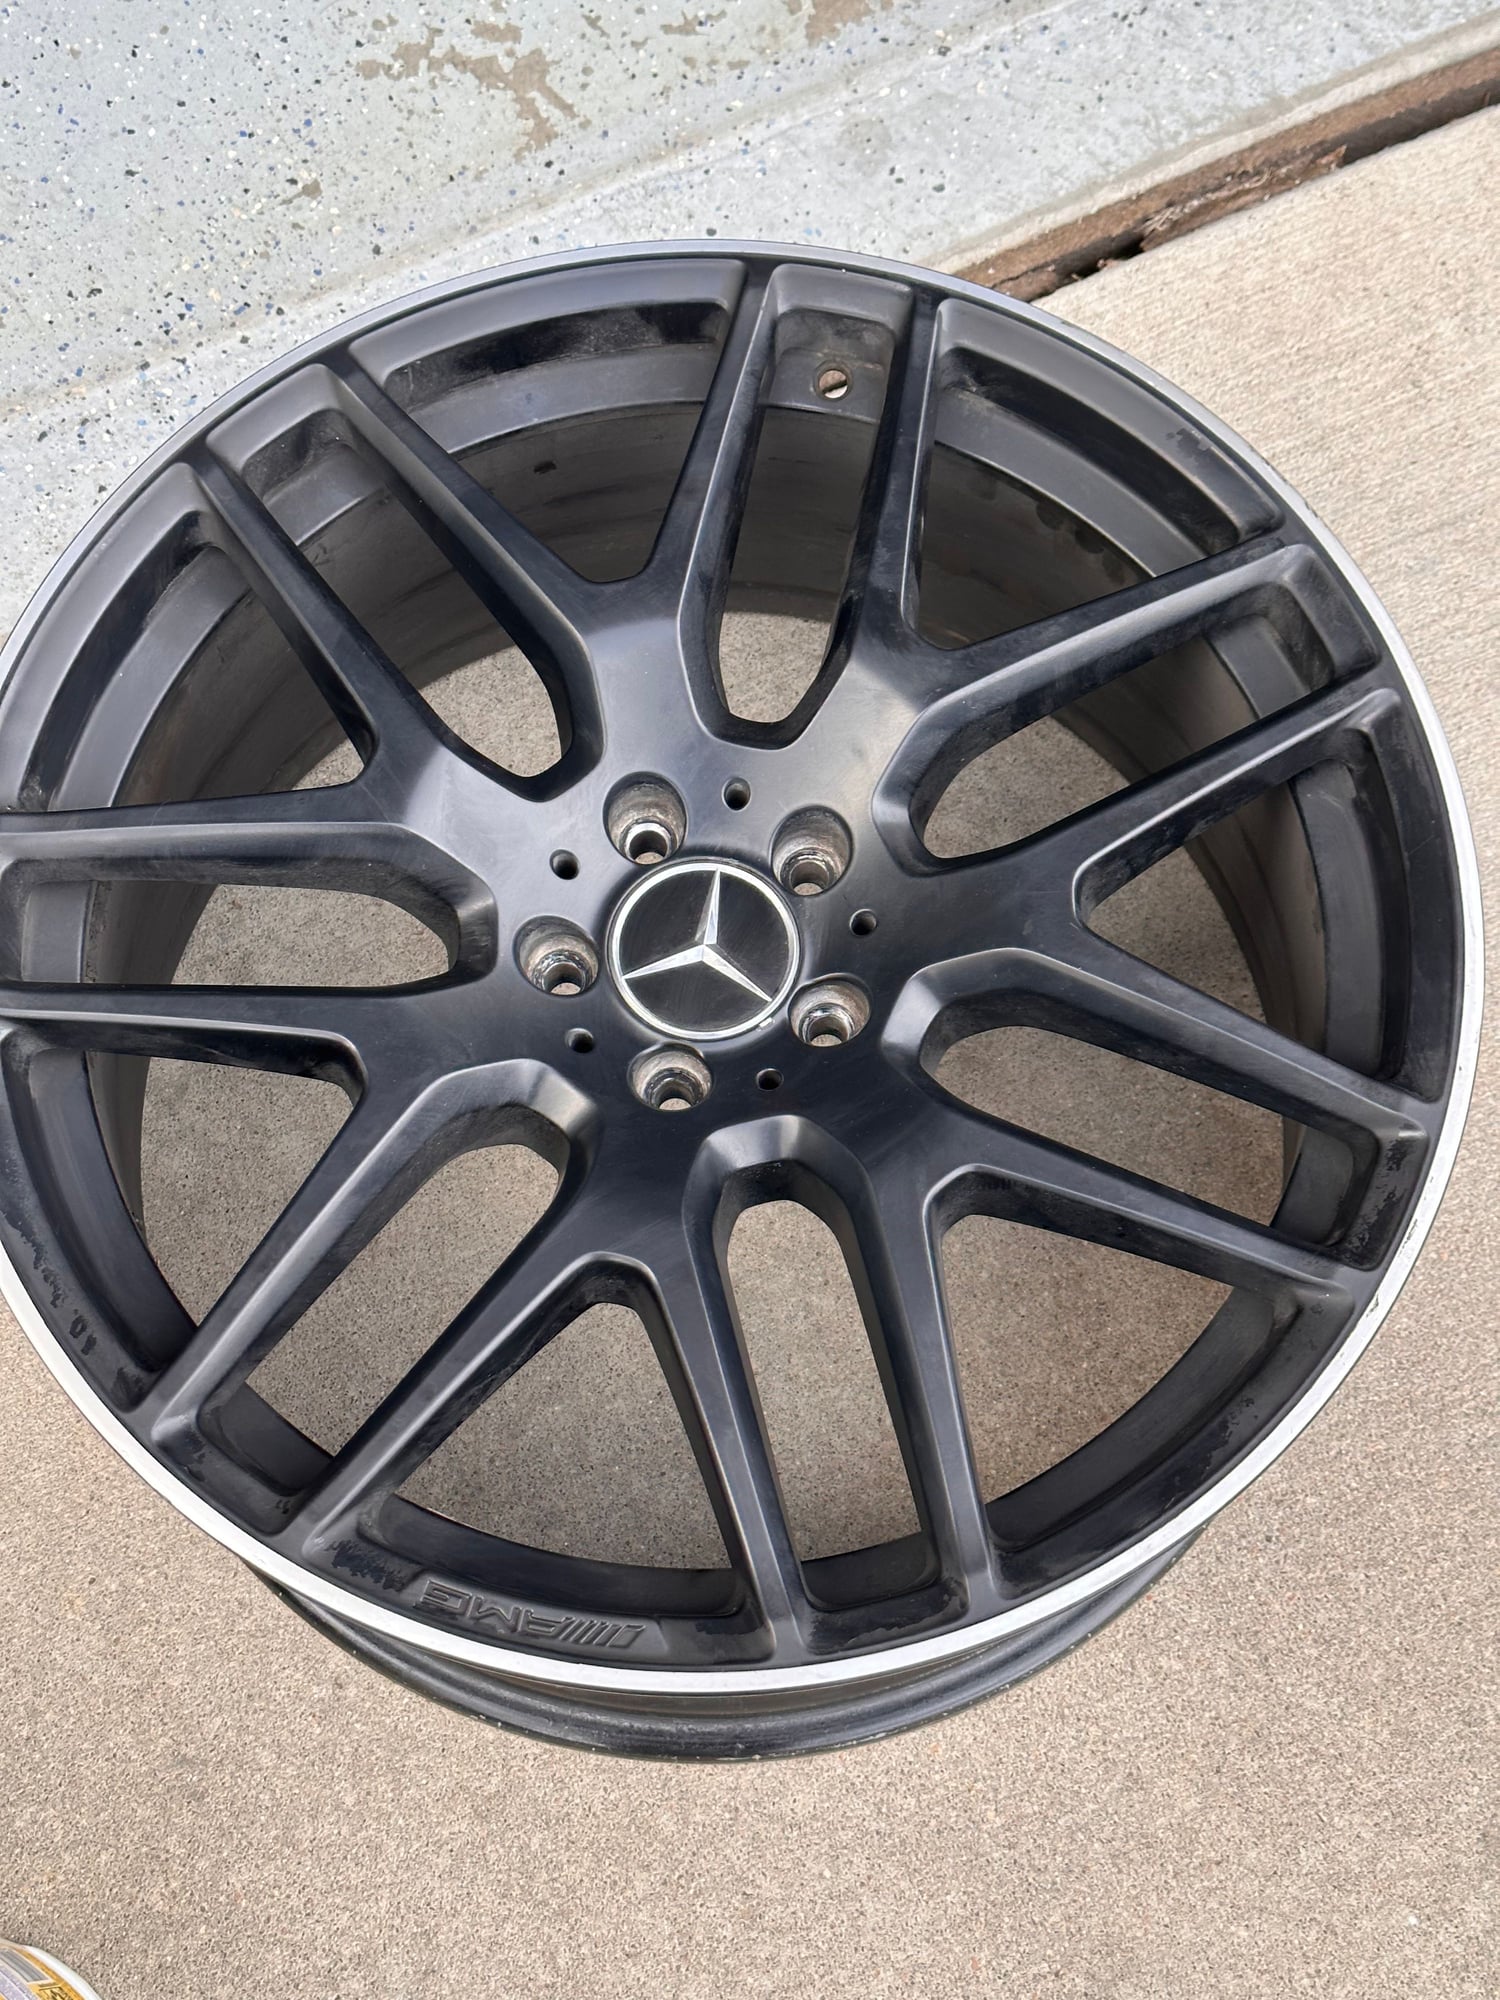 Wheels and Tires/Axles - OEM Mercedes AMG 21x10 Y-spoke matte black wheels W166 -$2500 - Used - 2016 to 2019 Mercedes-Benz GLC63 AMG S - Centennail, CO 80016, United States